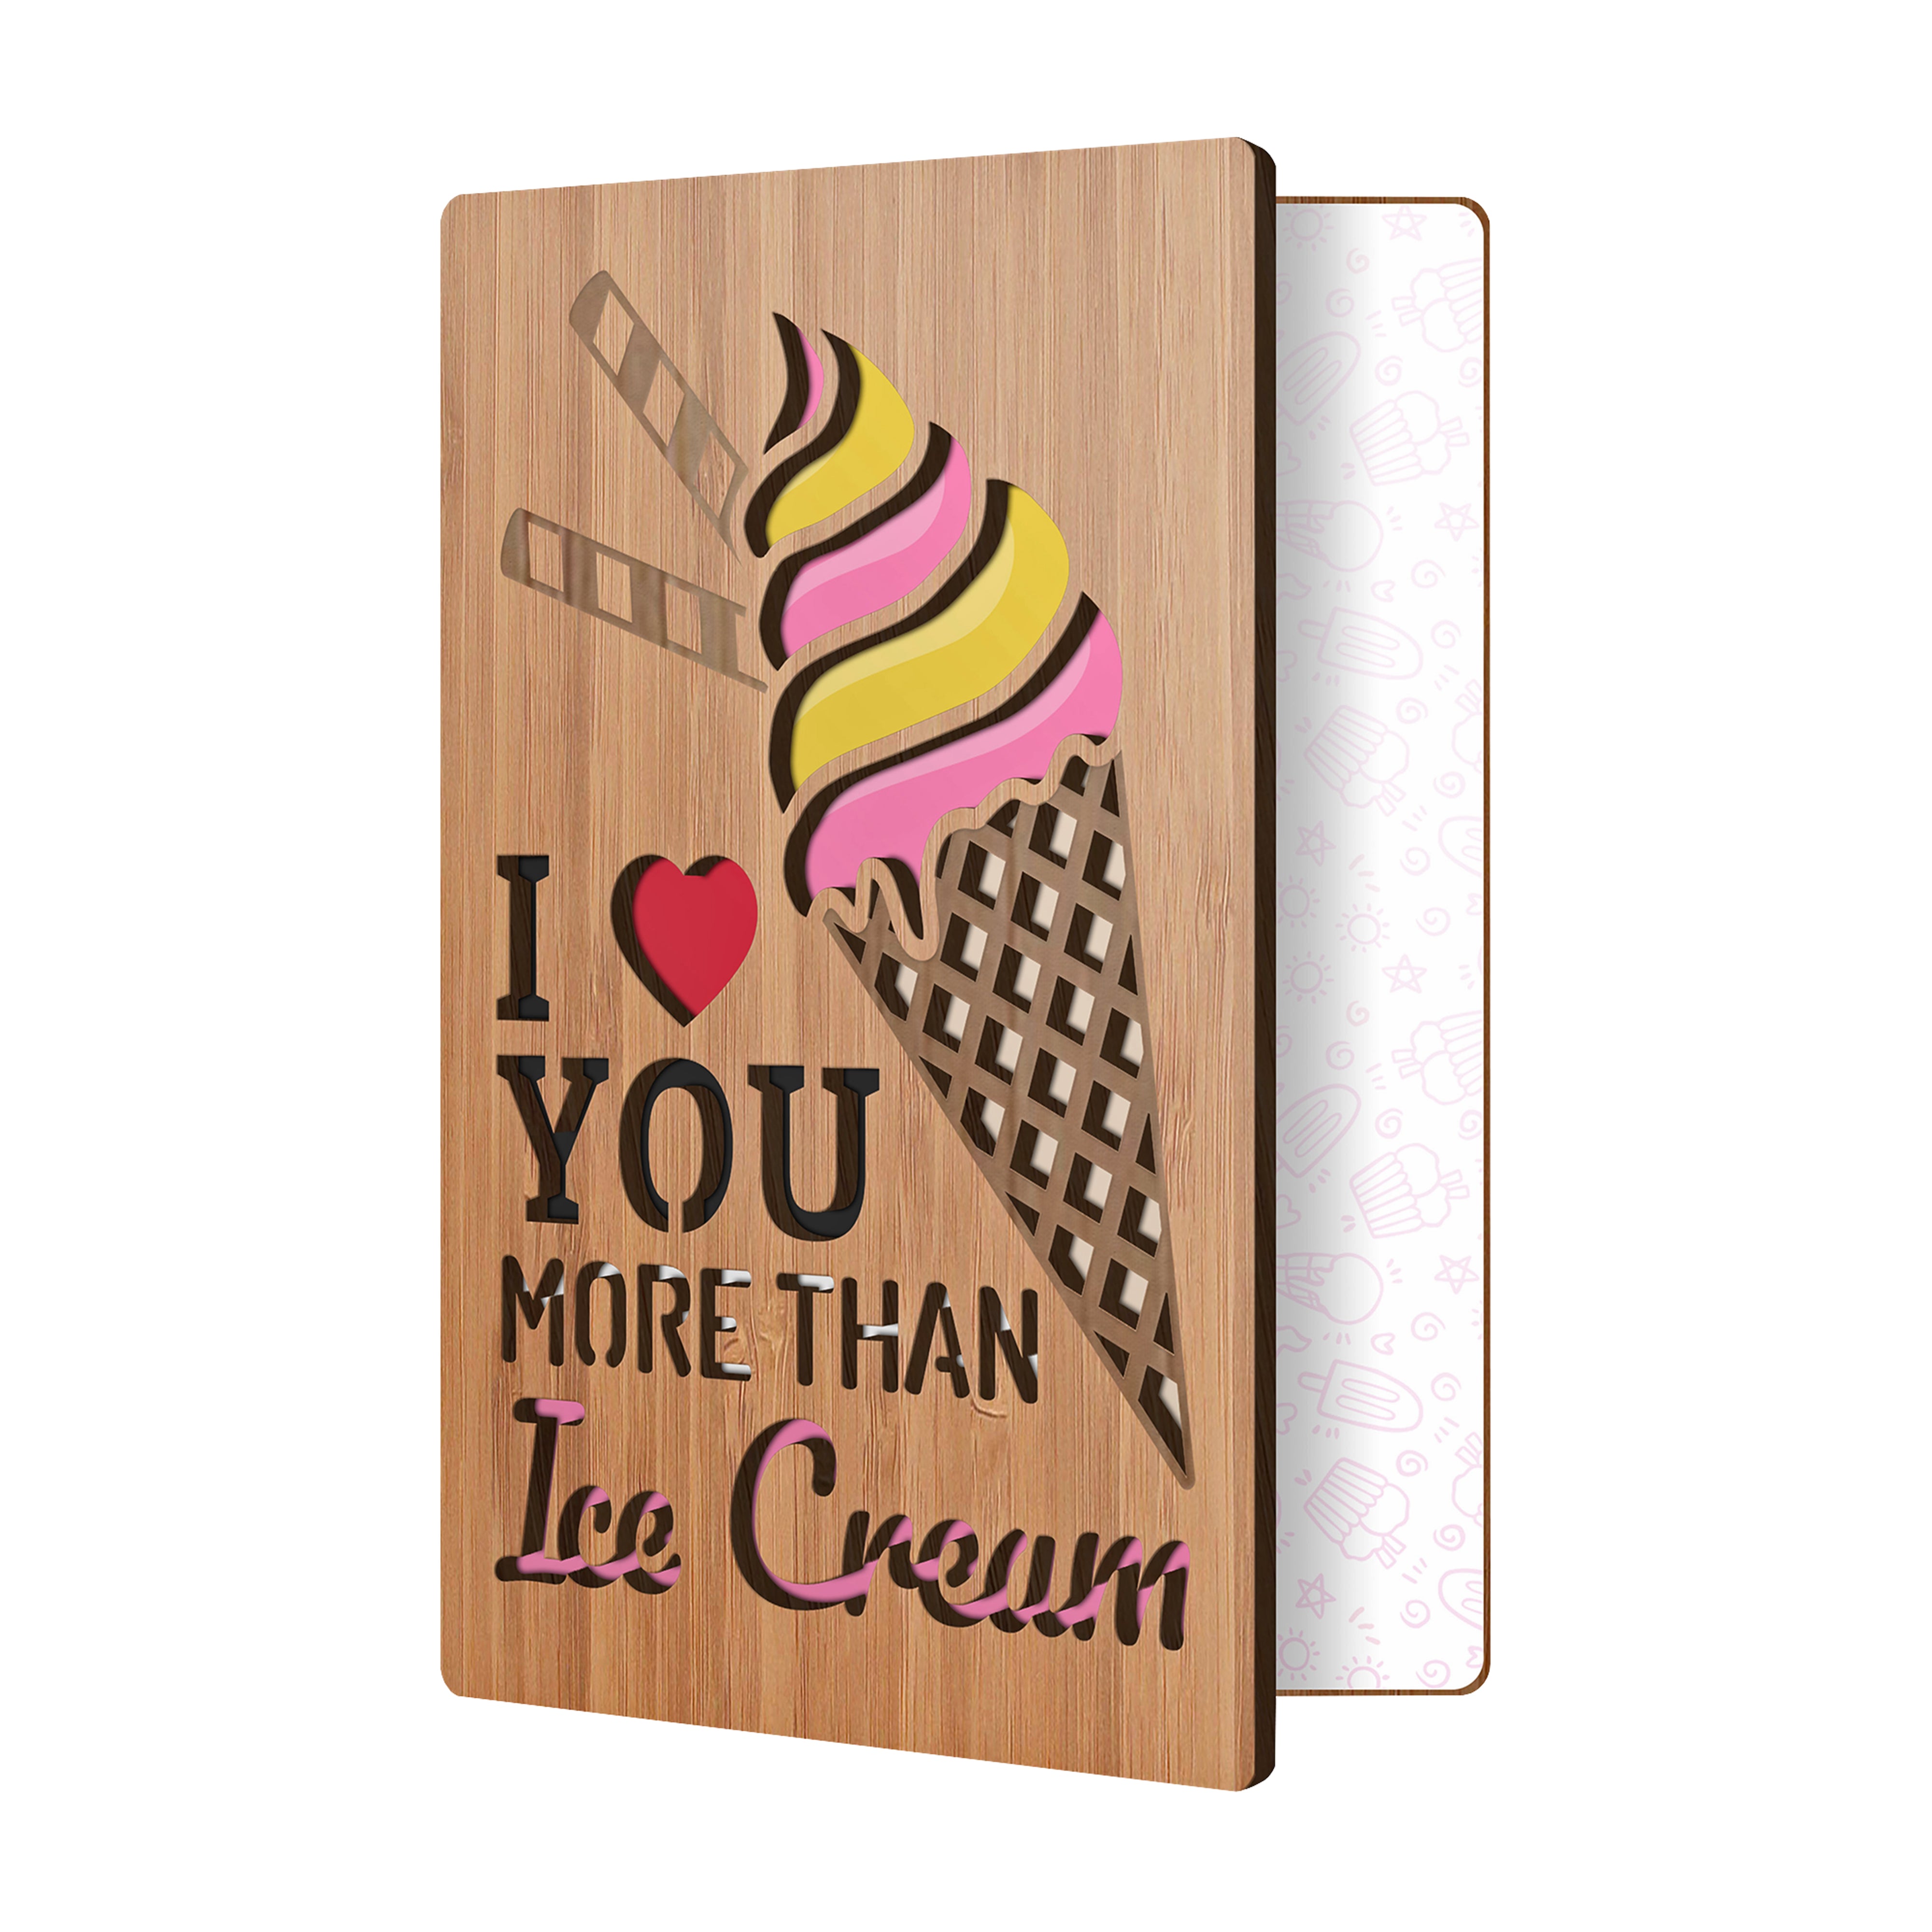 Handcrafted Bamboo Mother's Day Cards - Ice Cream